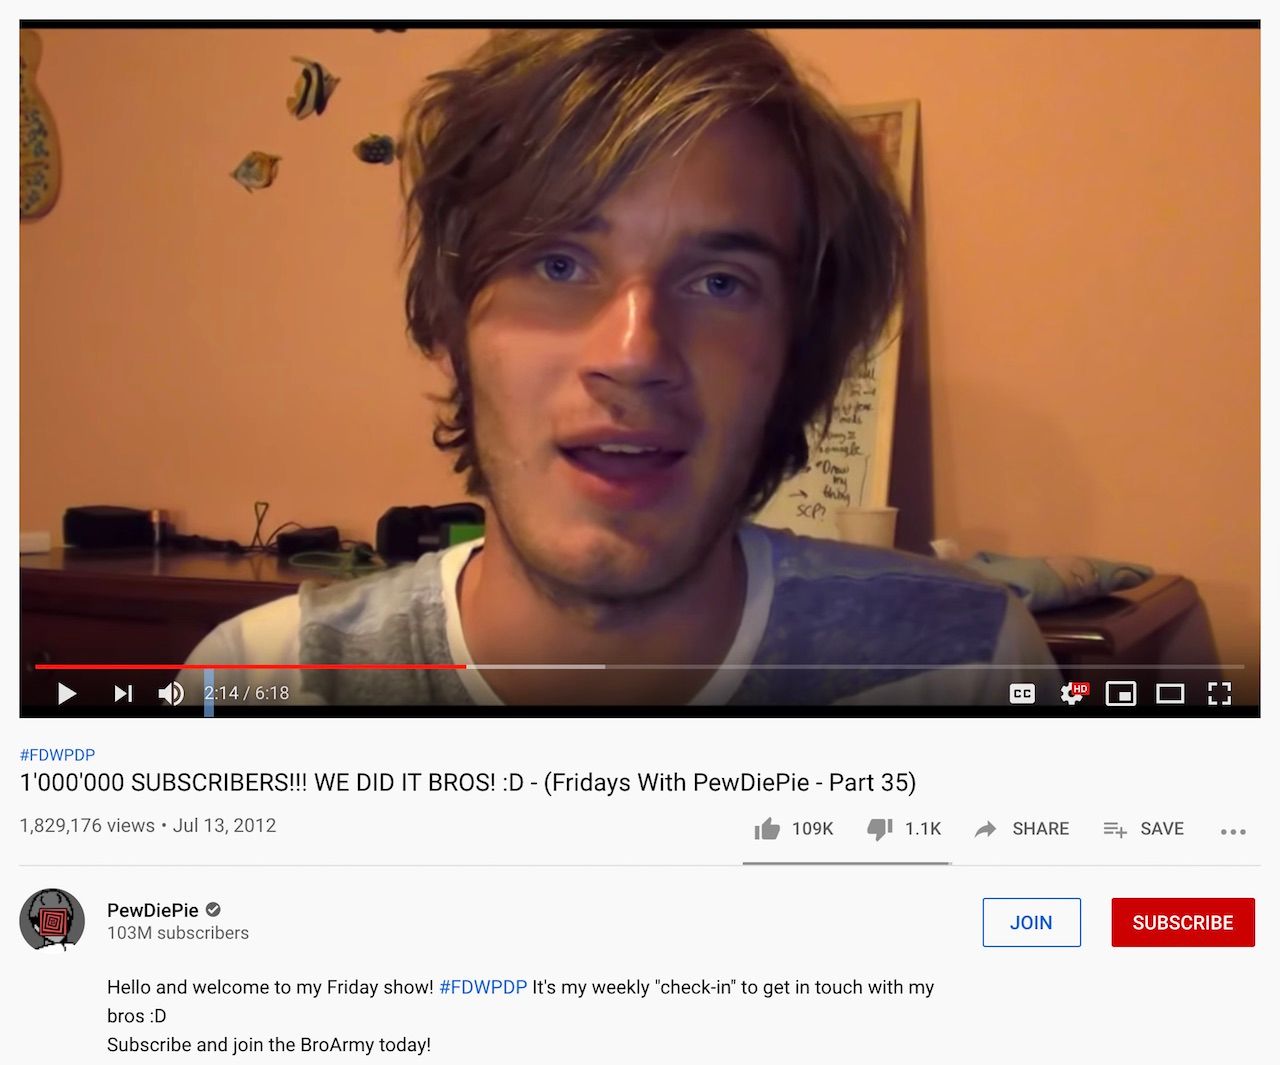 PewDiePie published his 1 million sub video in July 2012.